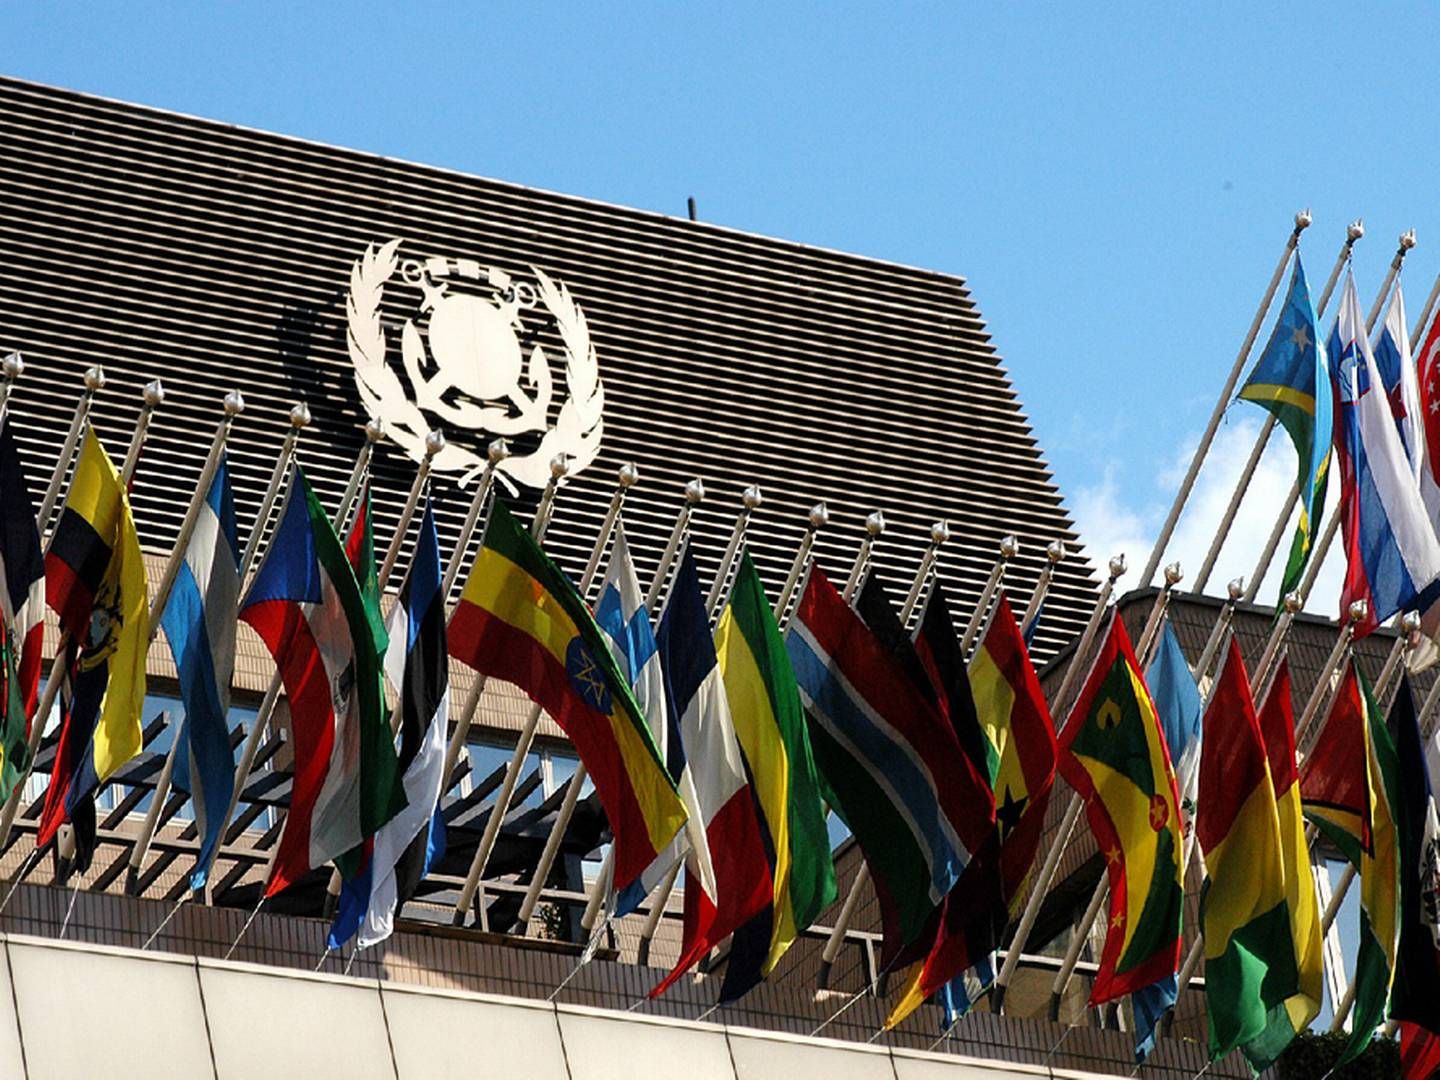 The IMO should administer a billion-dollar fund for the green energy transition of shipping, the ICS proposes. Money should come from a carbon levy. | Photo: Pr / Imo